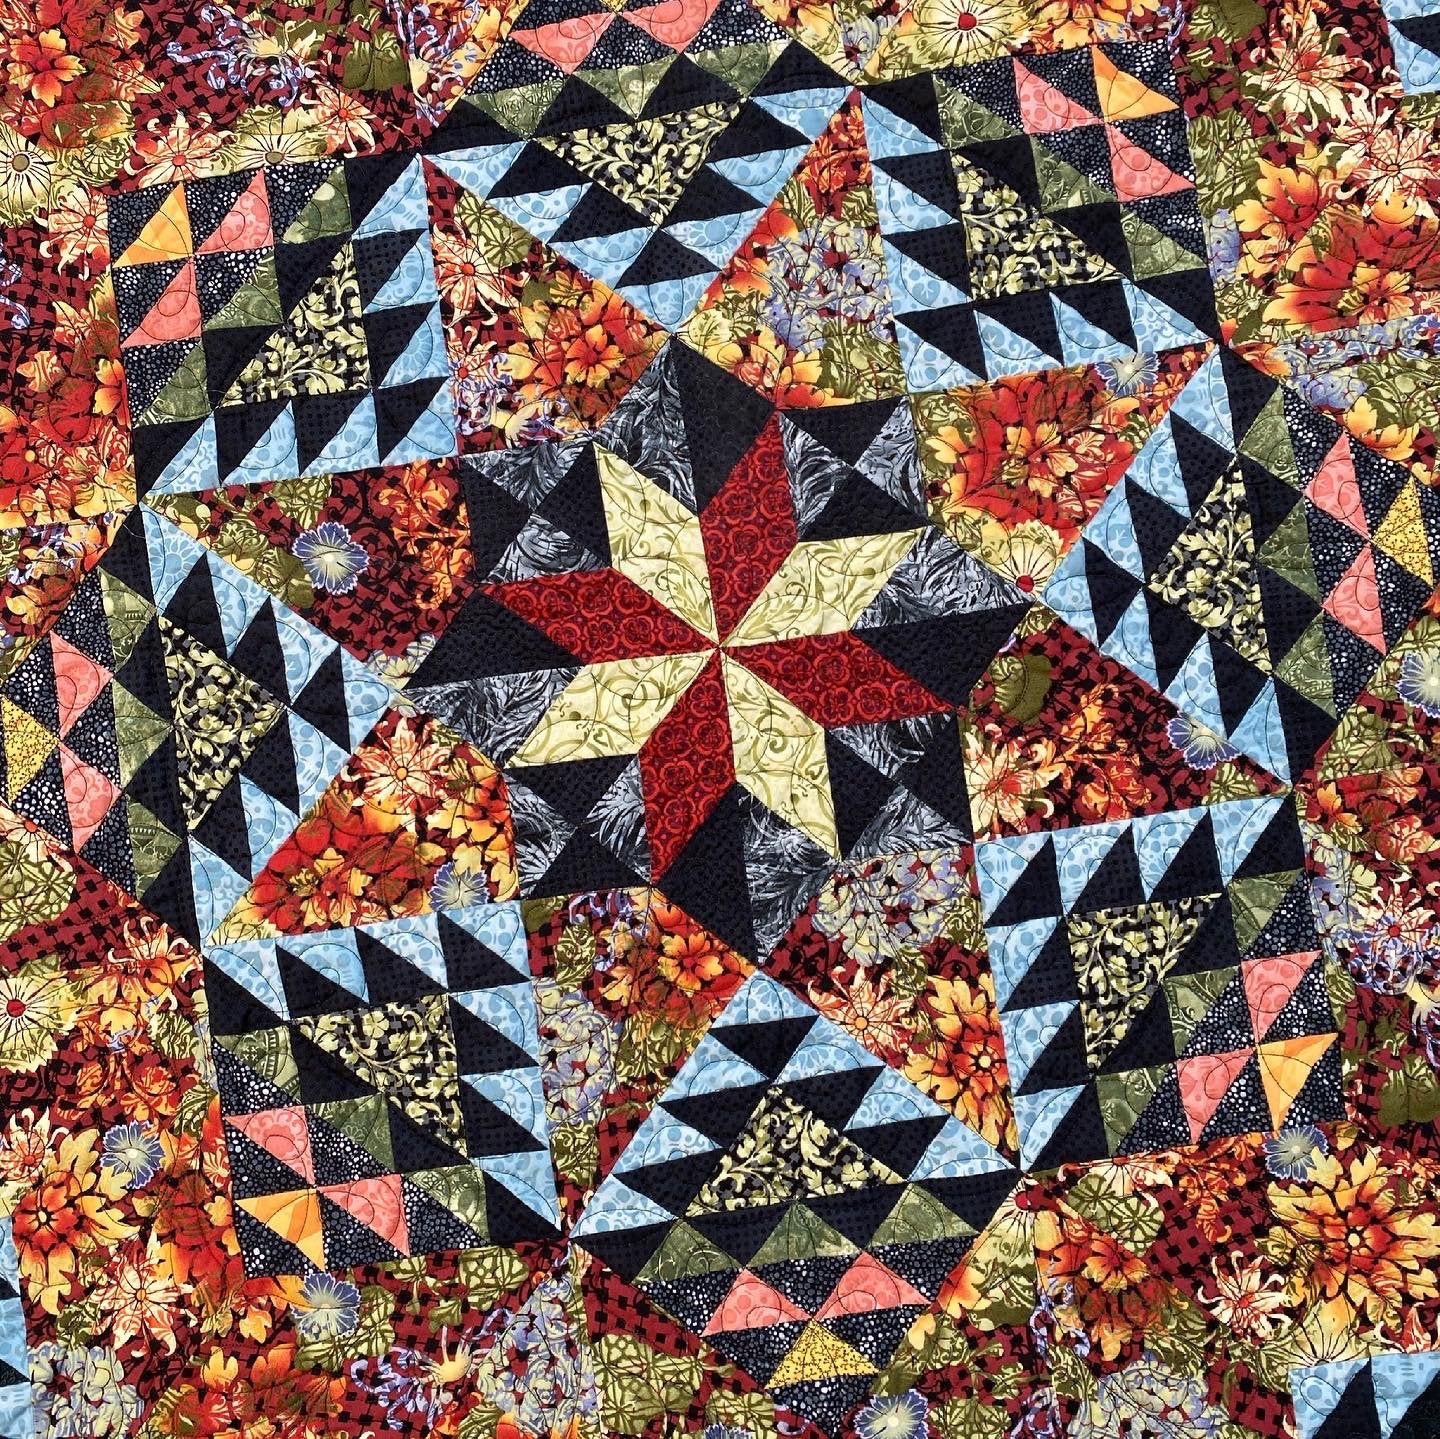 Feather Star Quilt